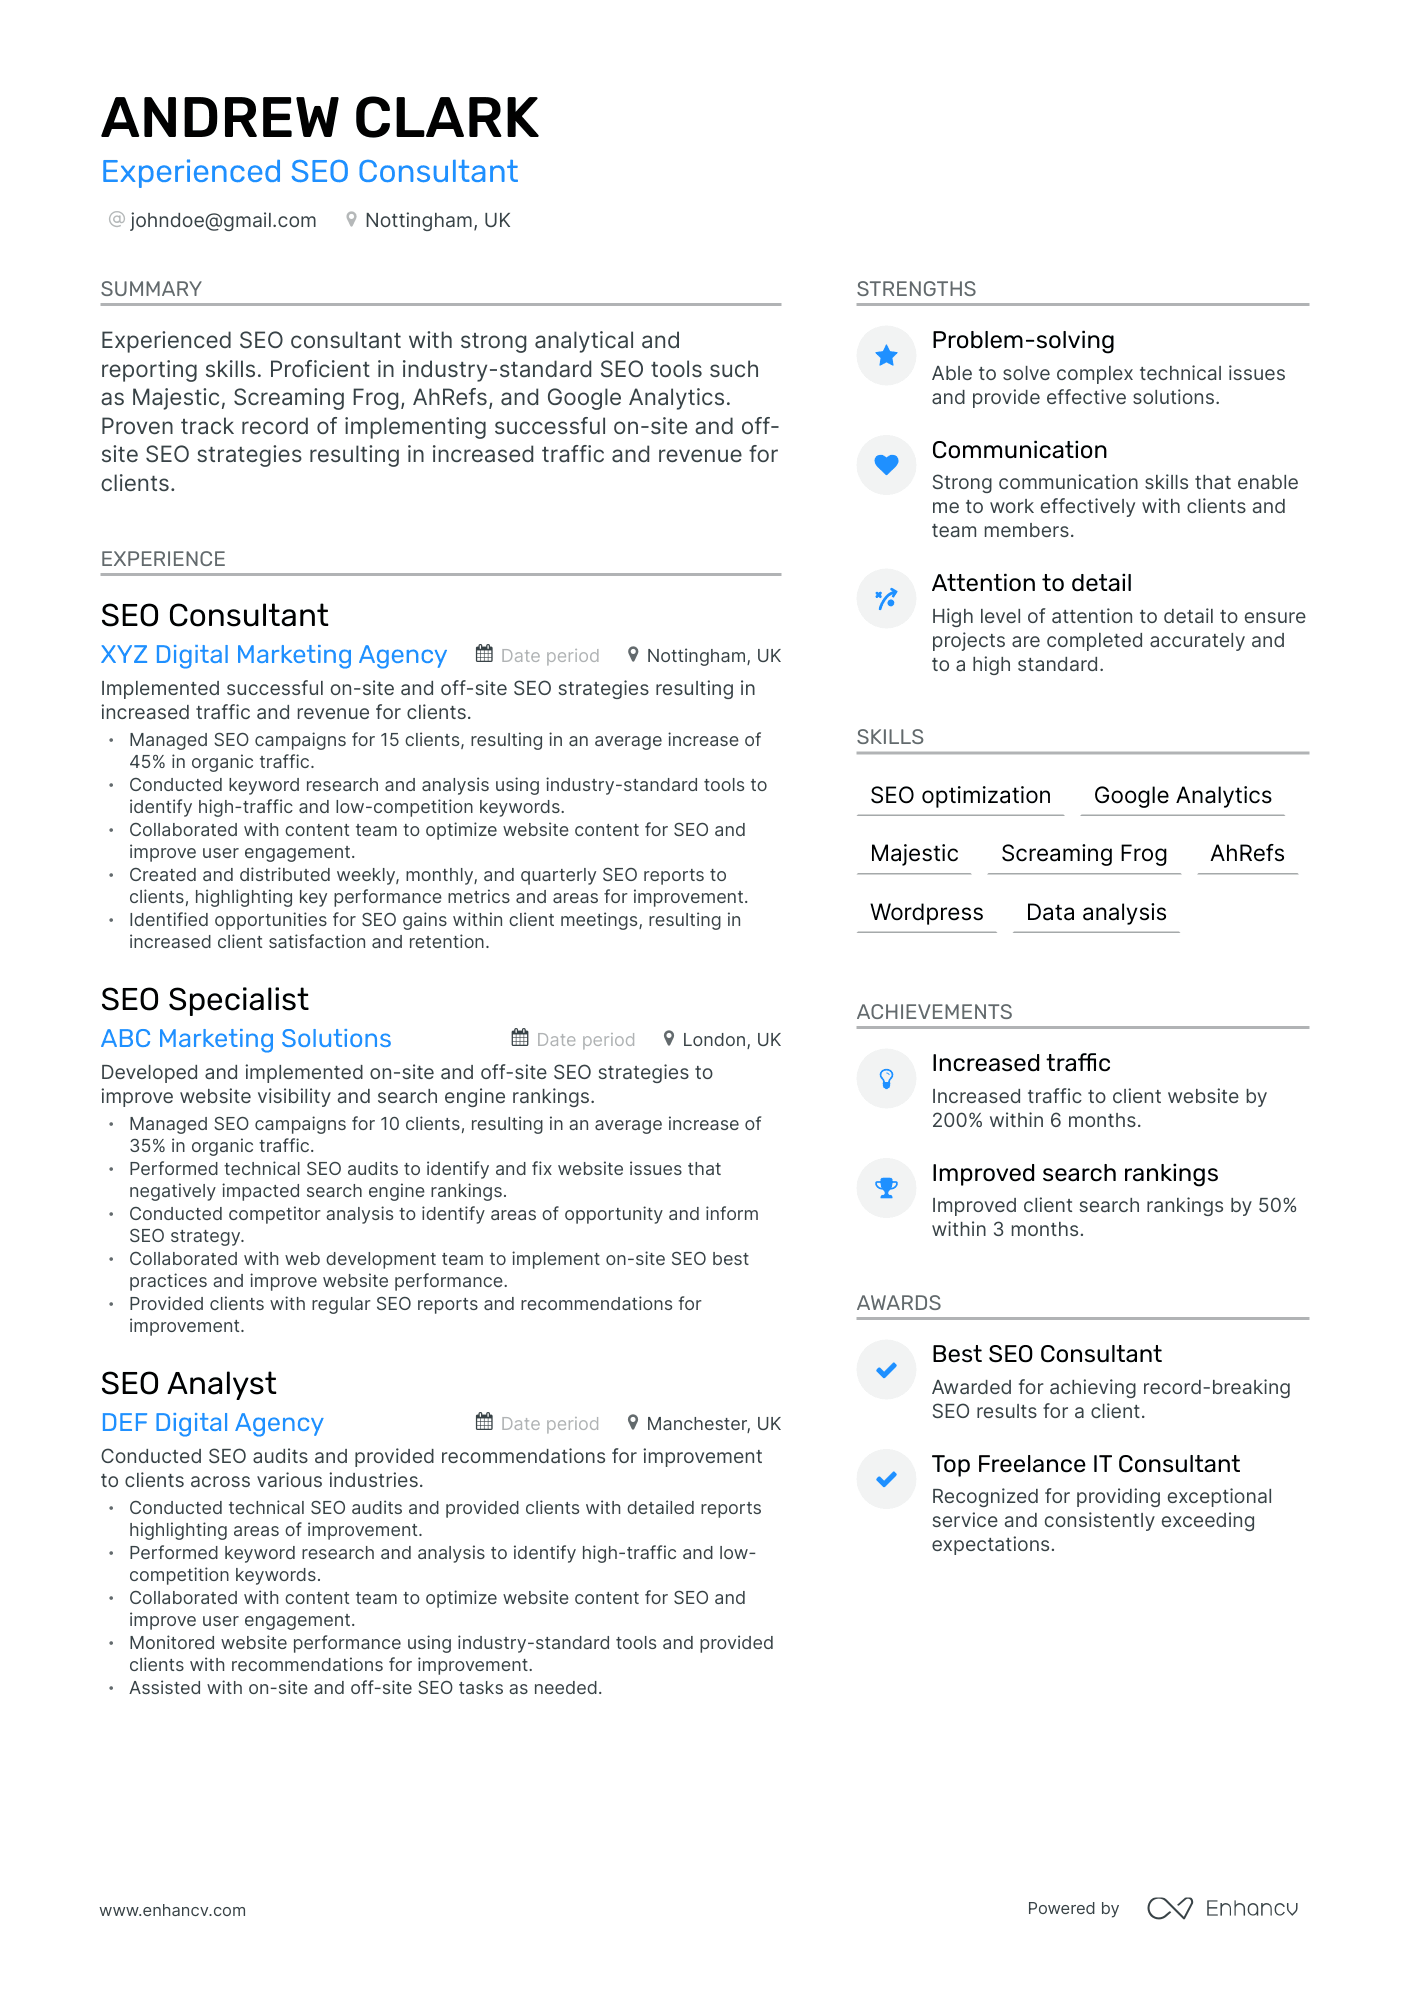 Modern Freelance IT Consultant Resume Template